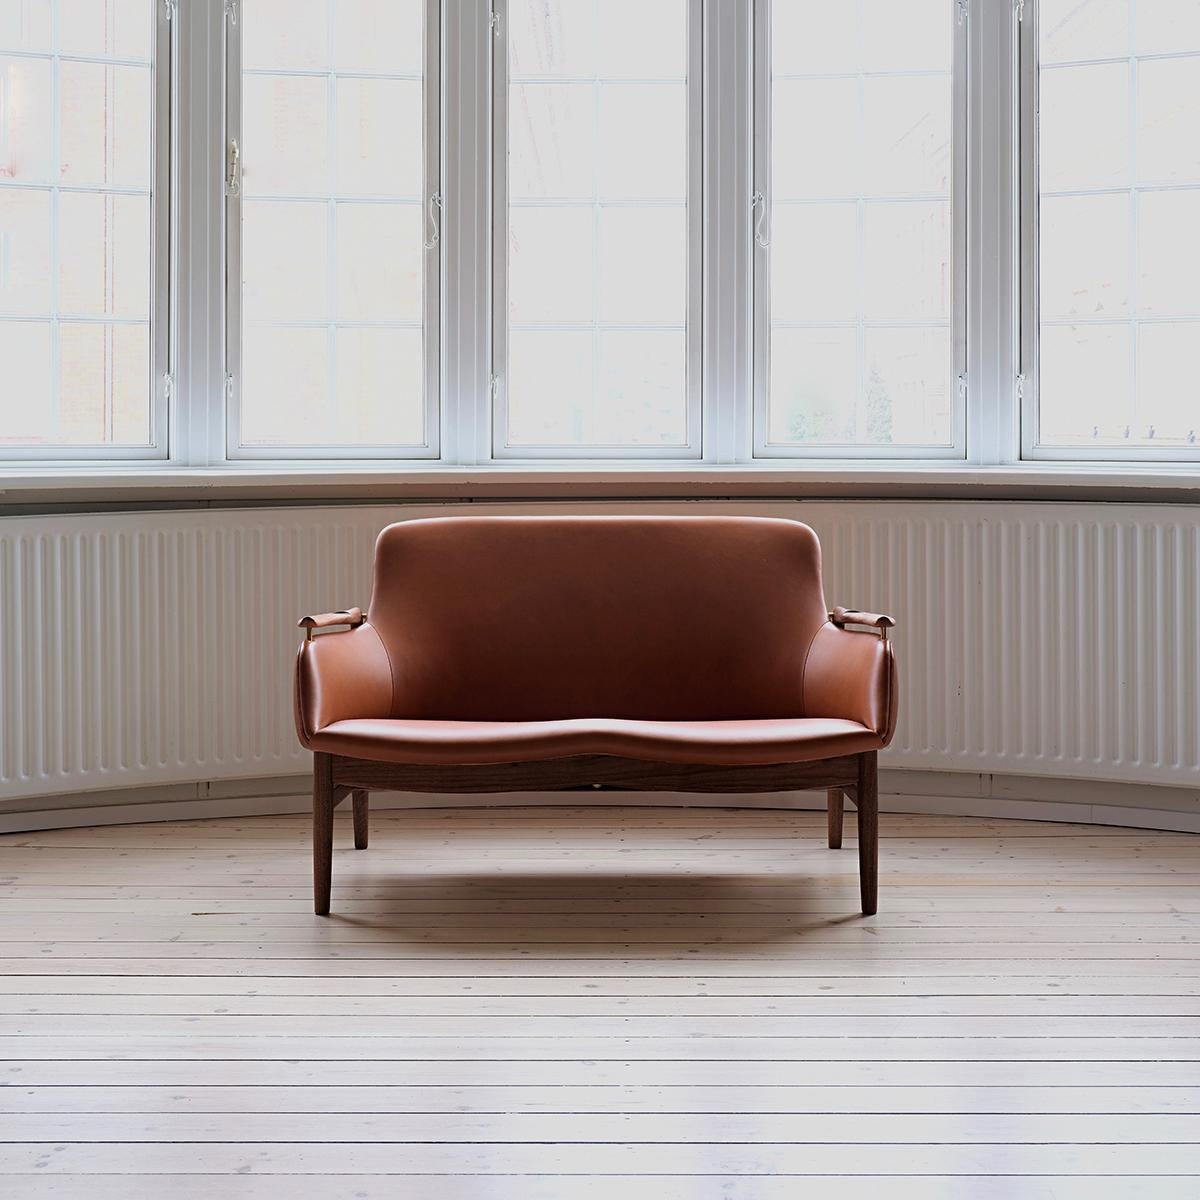 53 sofa designed by Finn Juhl in 1953, relaunched in 2020.
Manufactured by House of Finn Juhl in Denmark.

The FJ 53 is an extravagant piece of furniture. It integrates the lightness and elegance of a wooden chair with an upholstered corpus, to